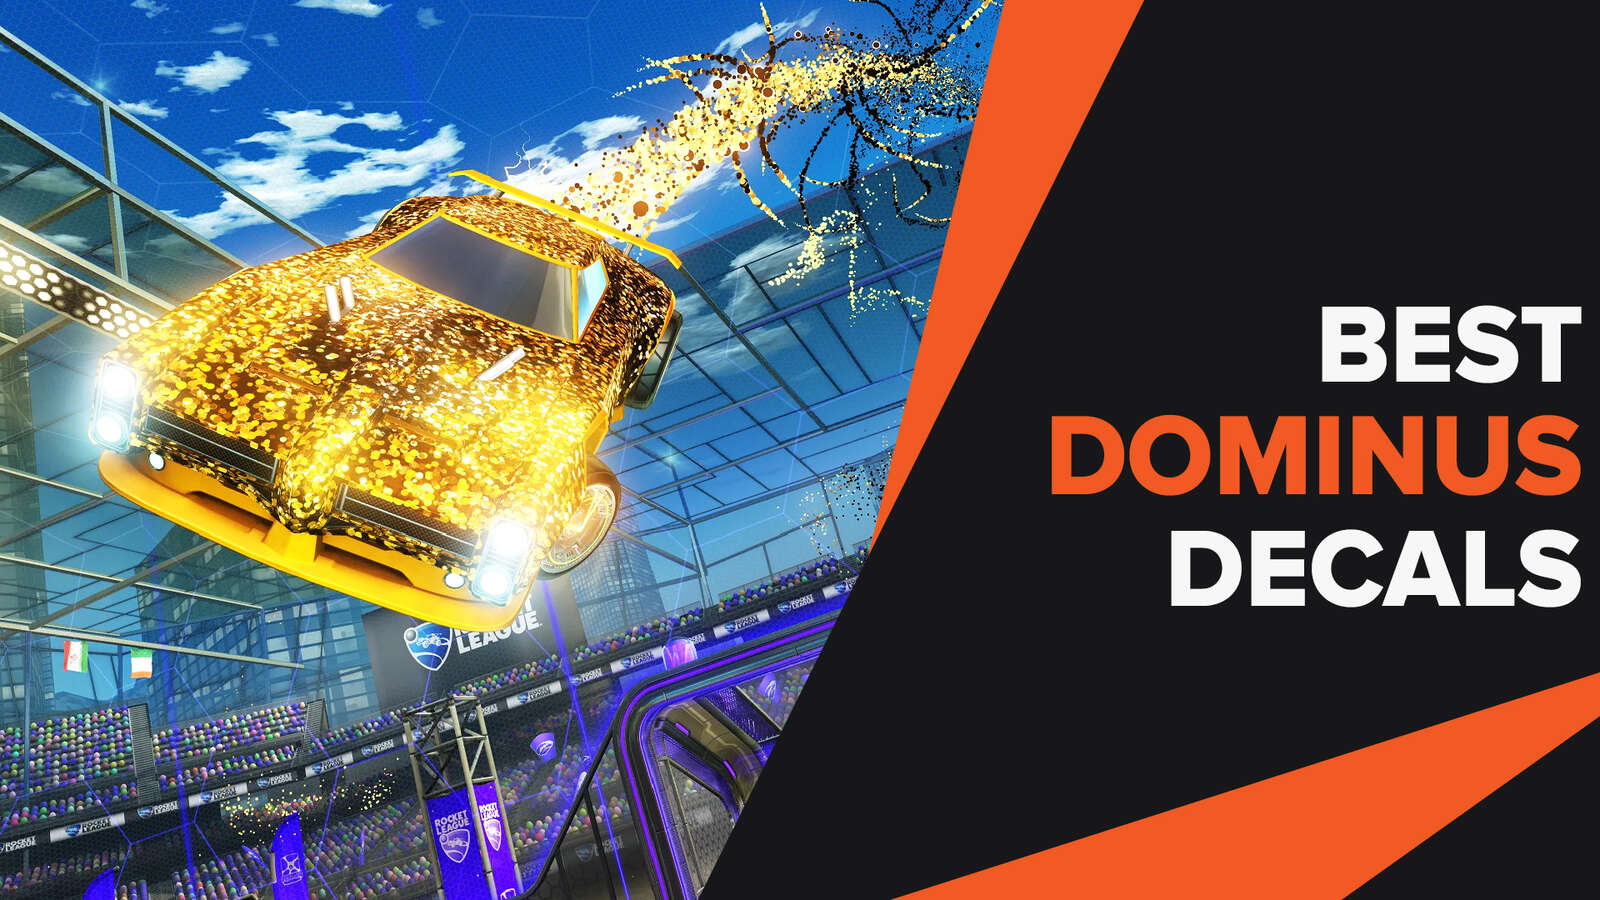 Best Dominus decals rocket league that will make you outshine your competition!